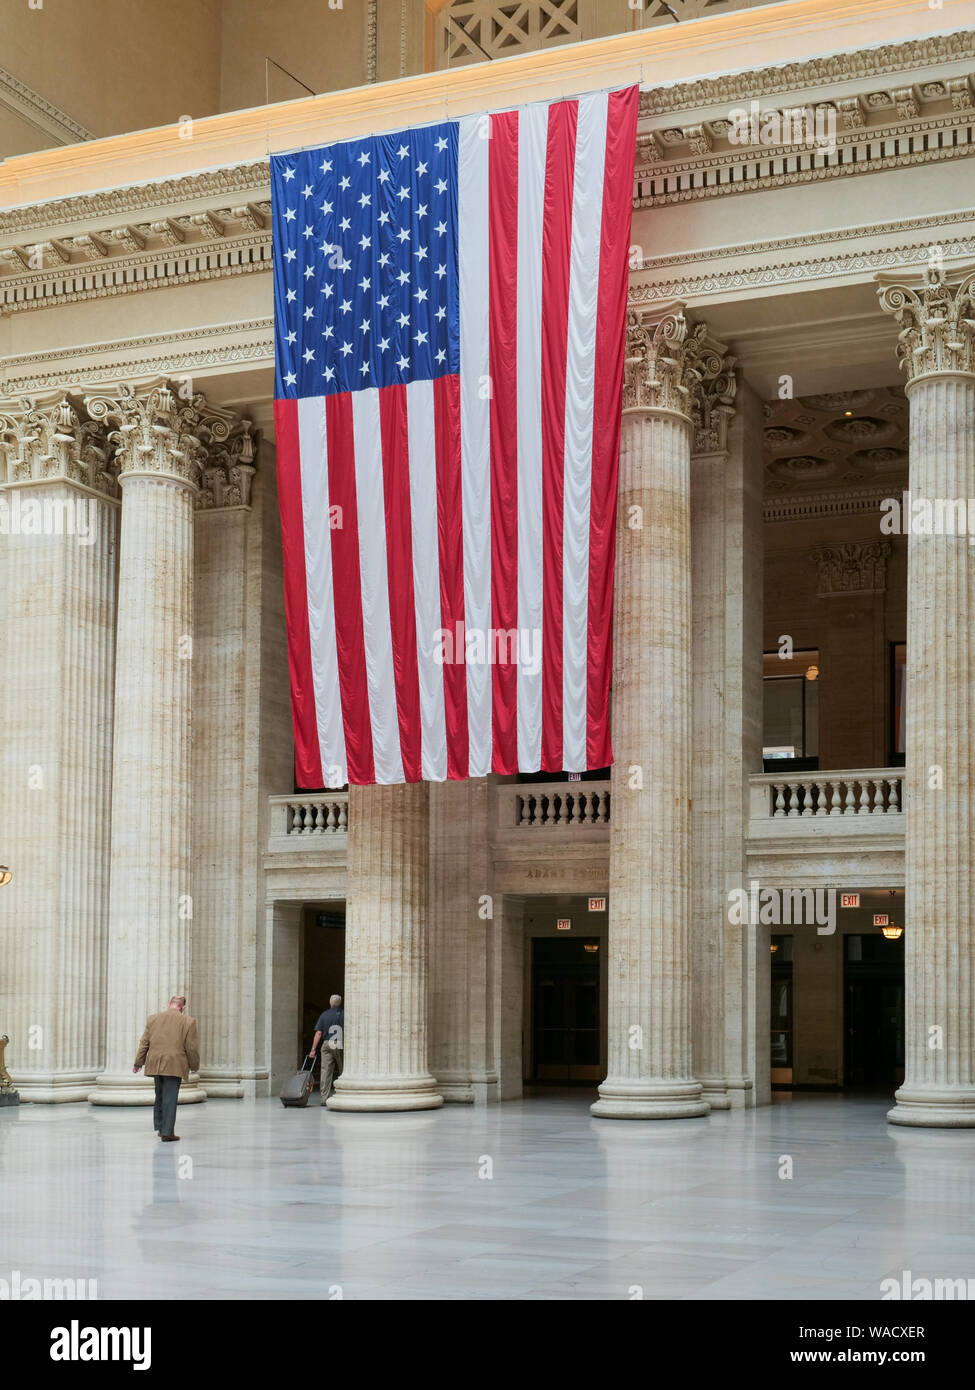 American flag, Great Room, Union Station. Chicago, Illinois. Stock Photo